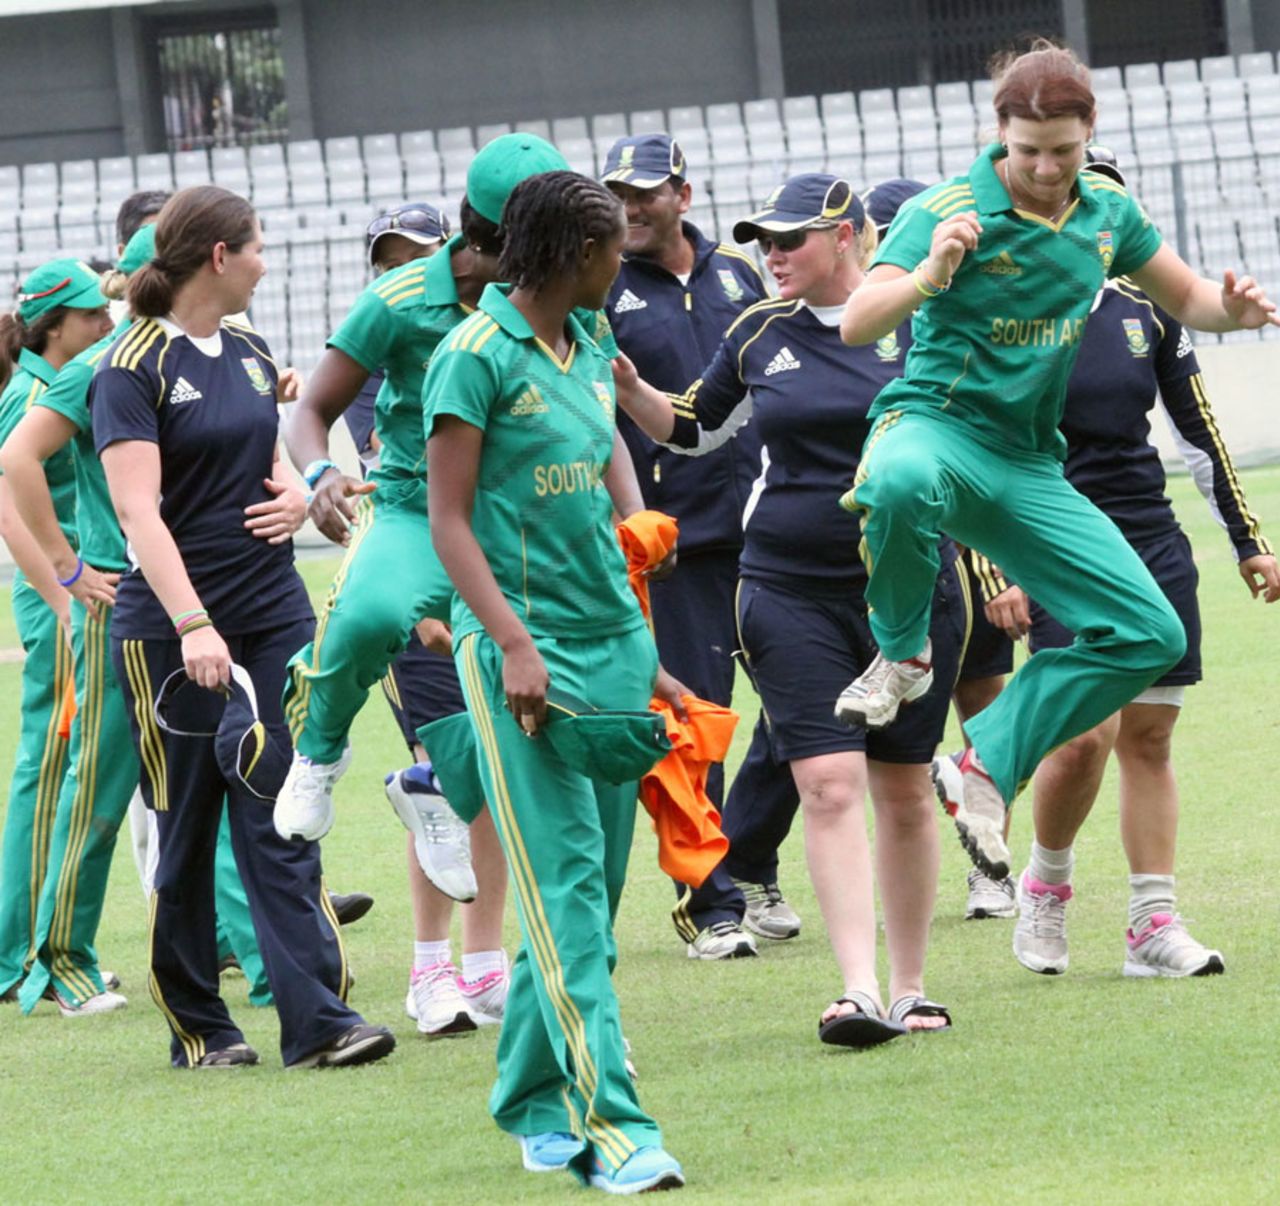 Yolandi van der Westhuizen (right) is delighted with the win, Bangladesh Women v South Africa Women, 3rd ODI, Dhaka, September 9, 2012